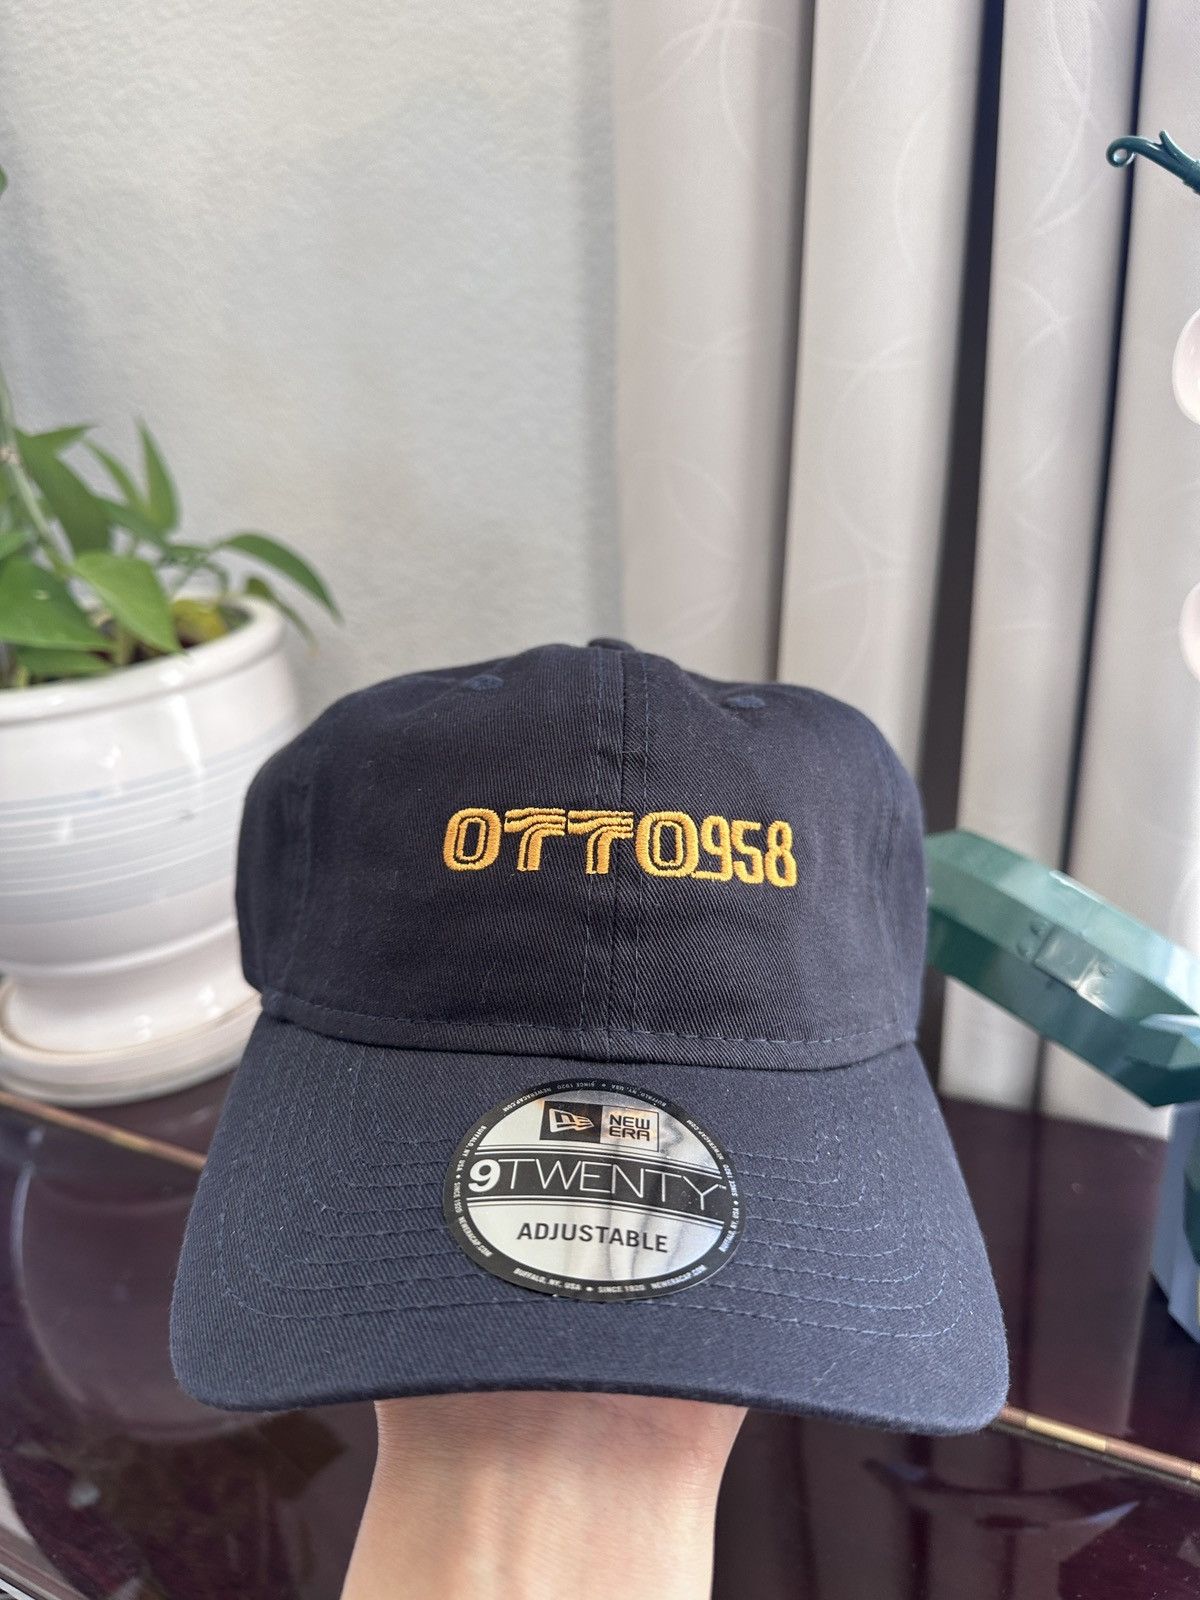 otto958 fifth general store キャップ - キャップ